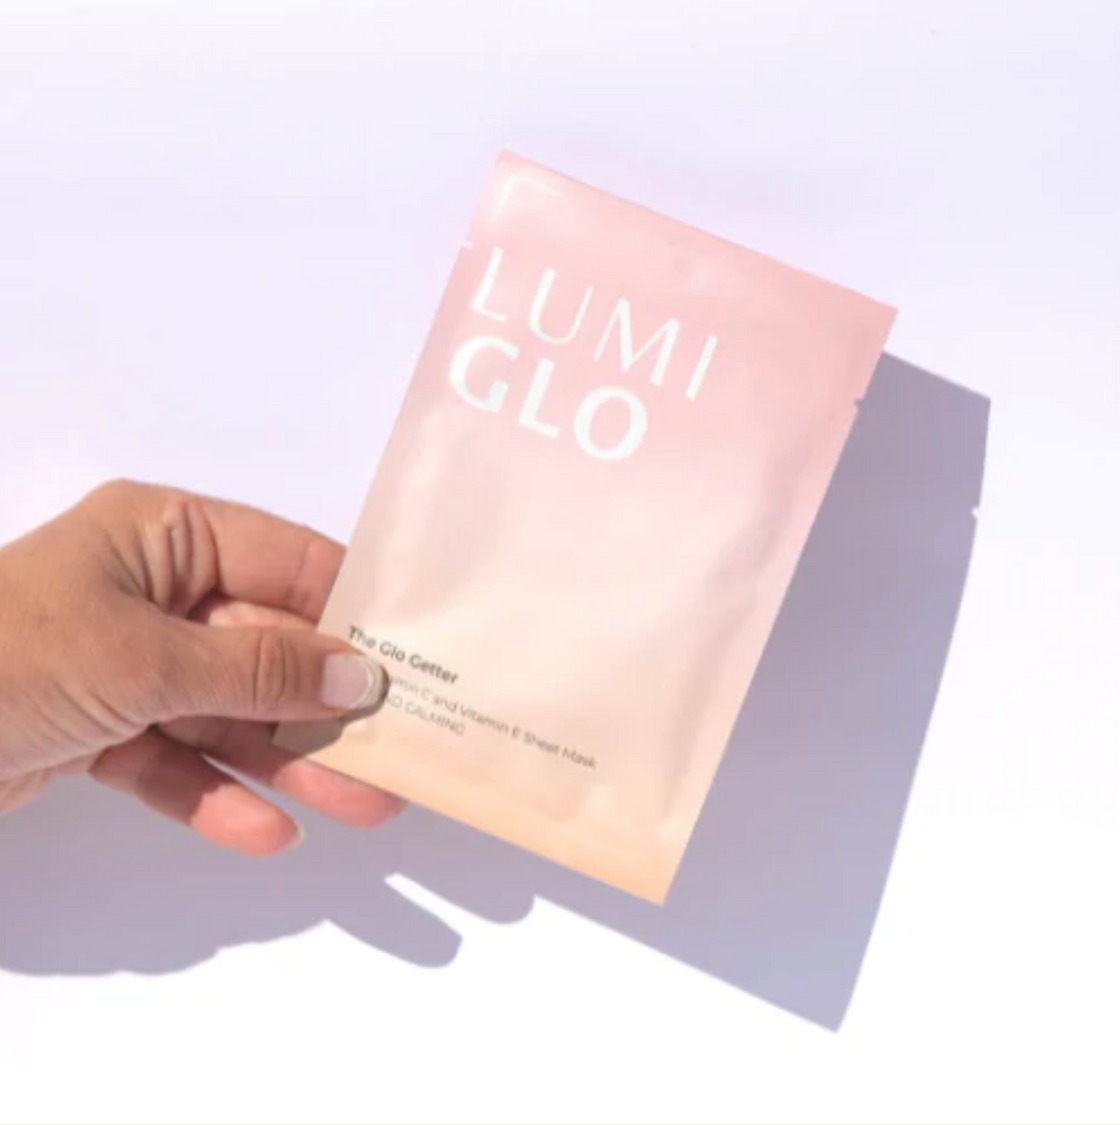 The Glo Getter - Sheet Mask